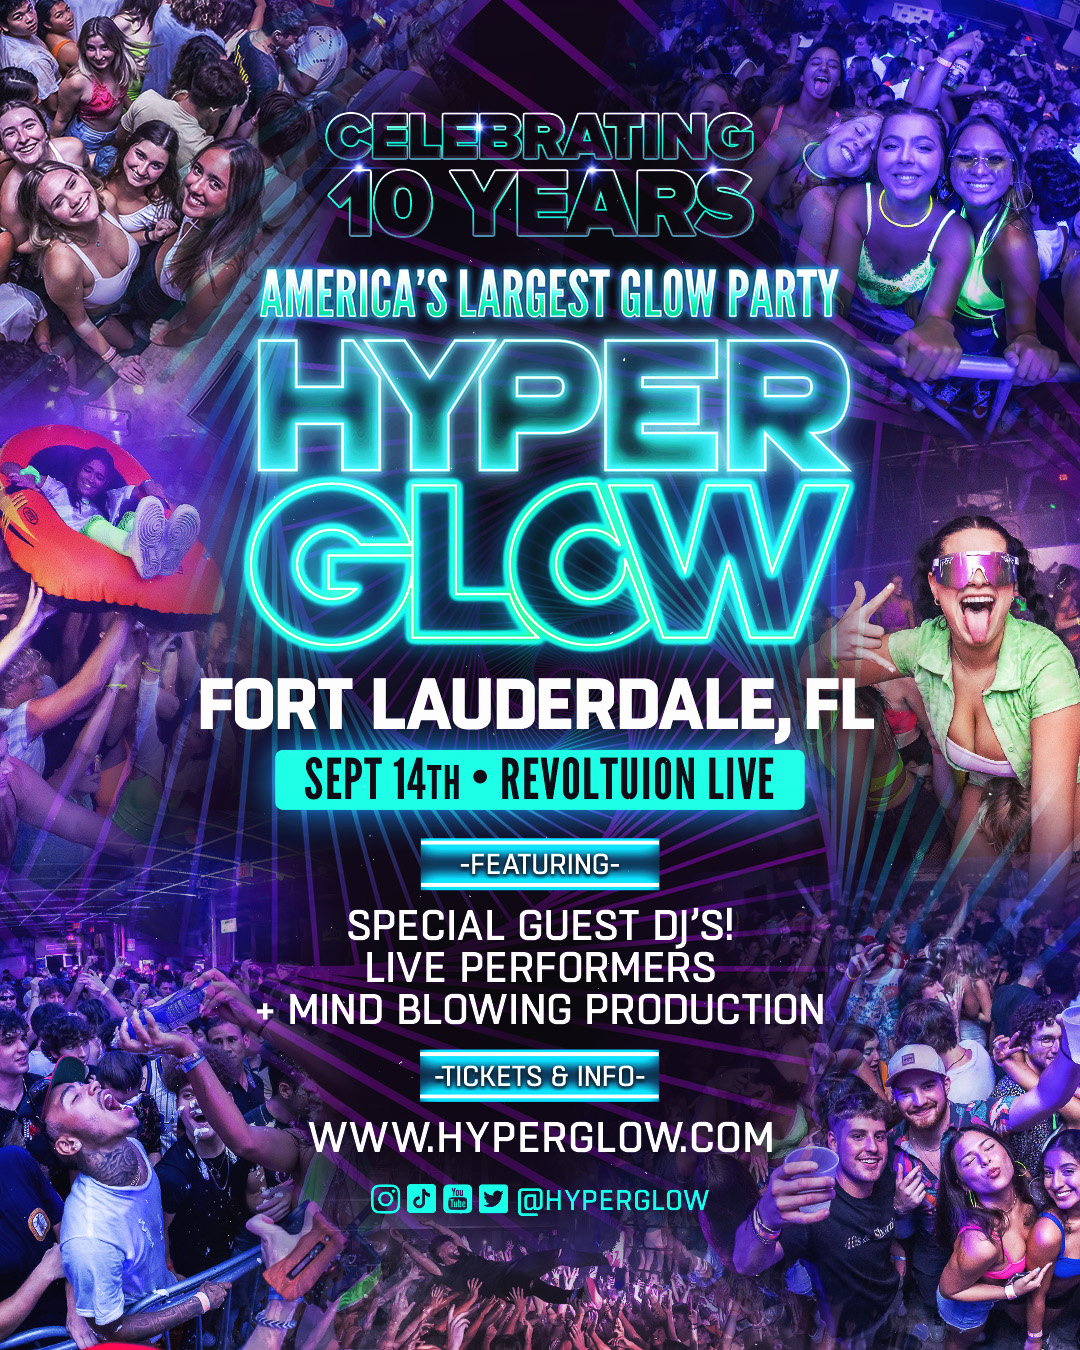 HYPERGLOW "America’s Largest Glow Party" - 10 Year Anniversary!